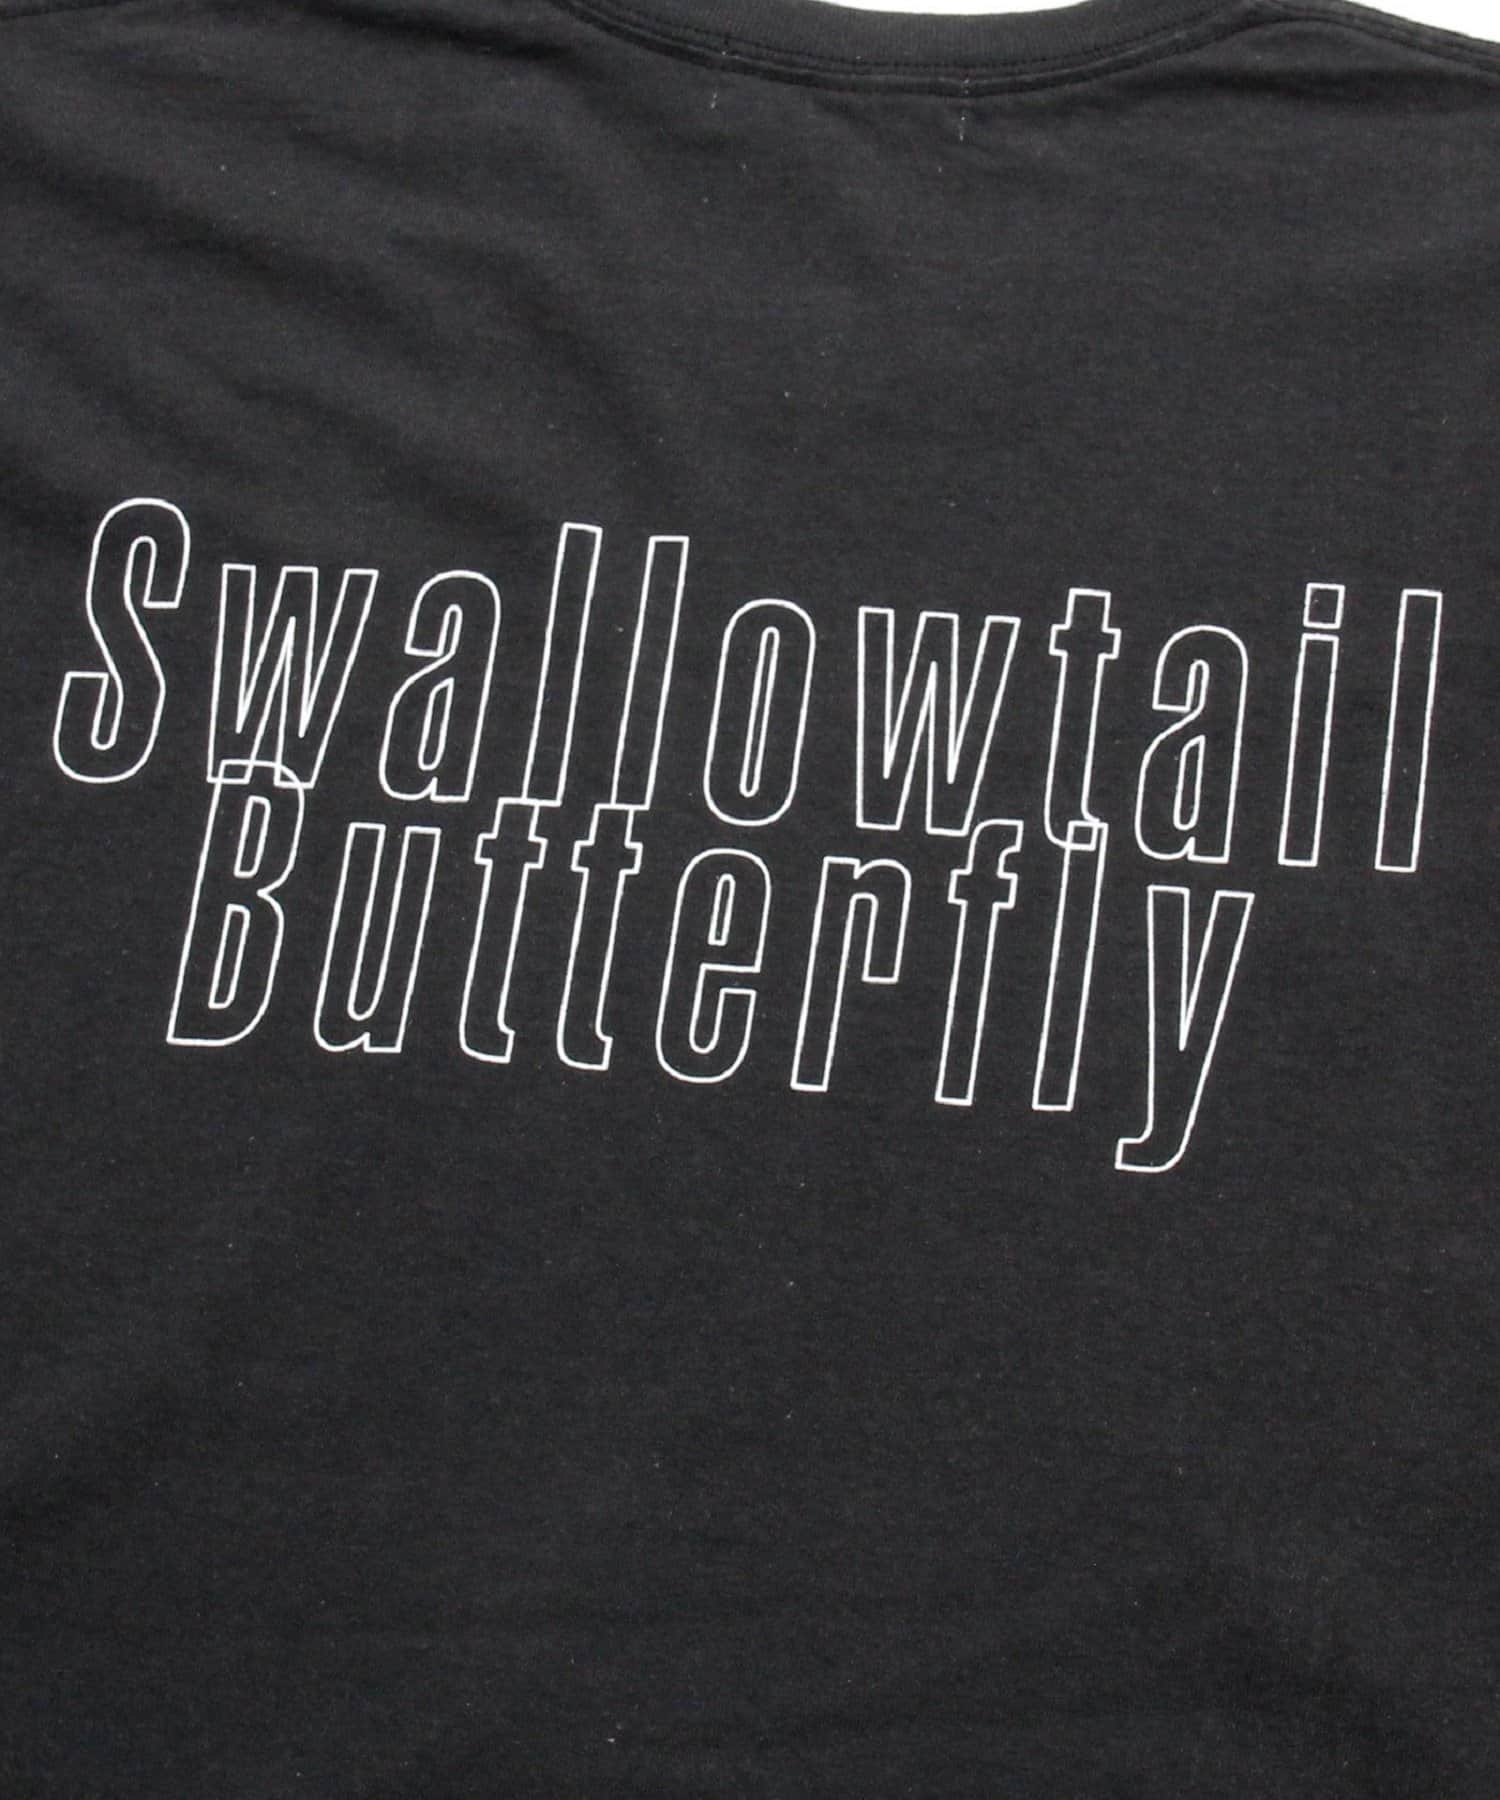 WHO’S WHO gallery(フーズフーギャラリー) 【LSB】x SWALLOWTAIL vintage big photo t